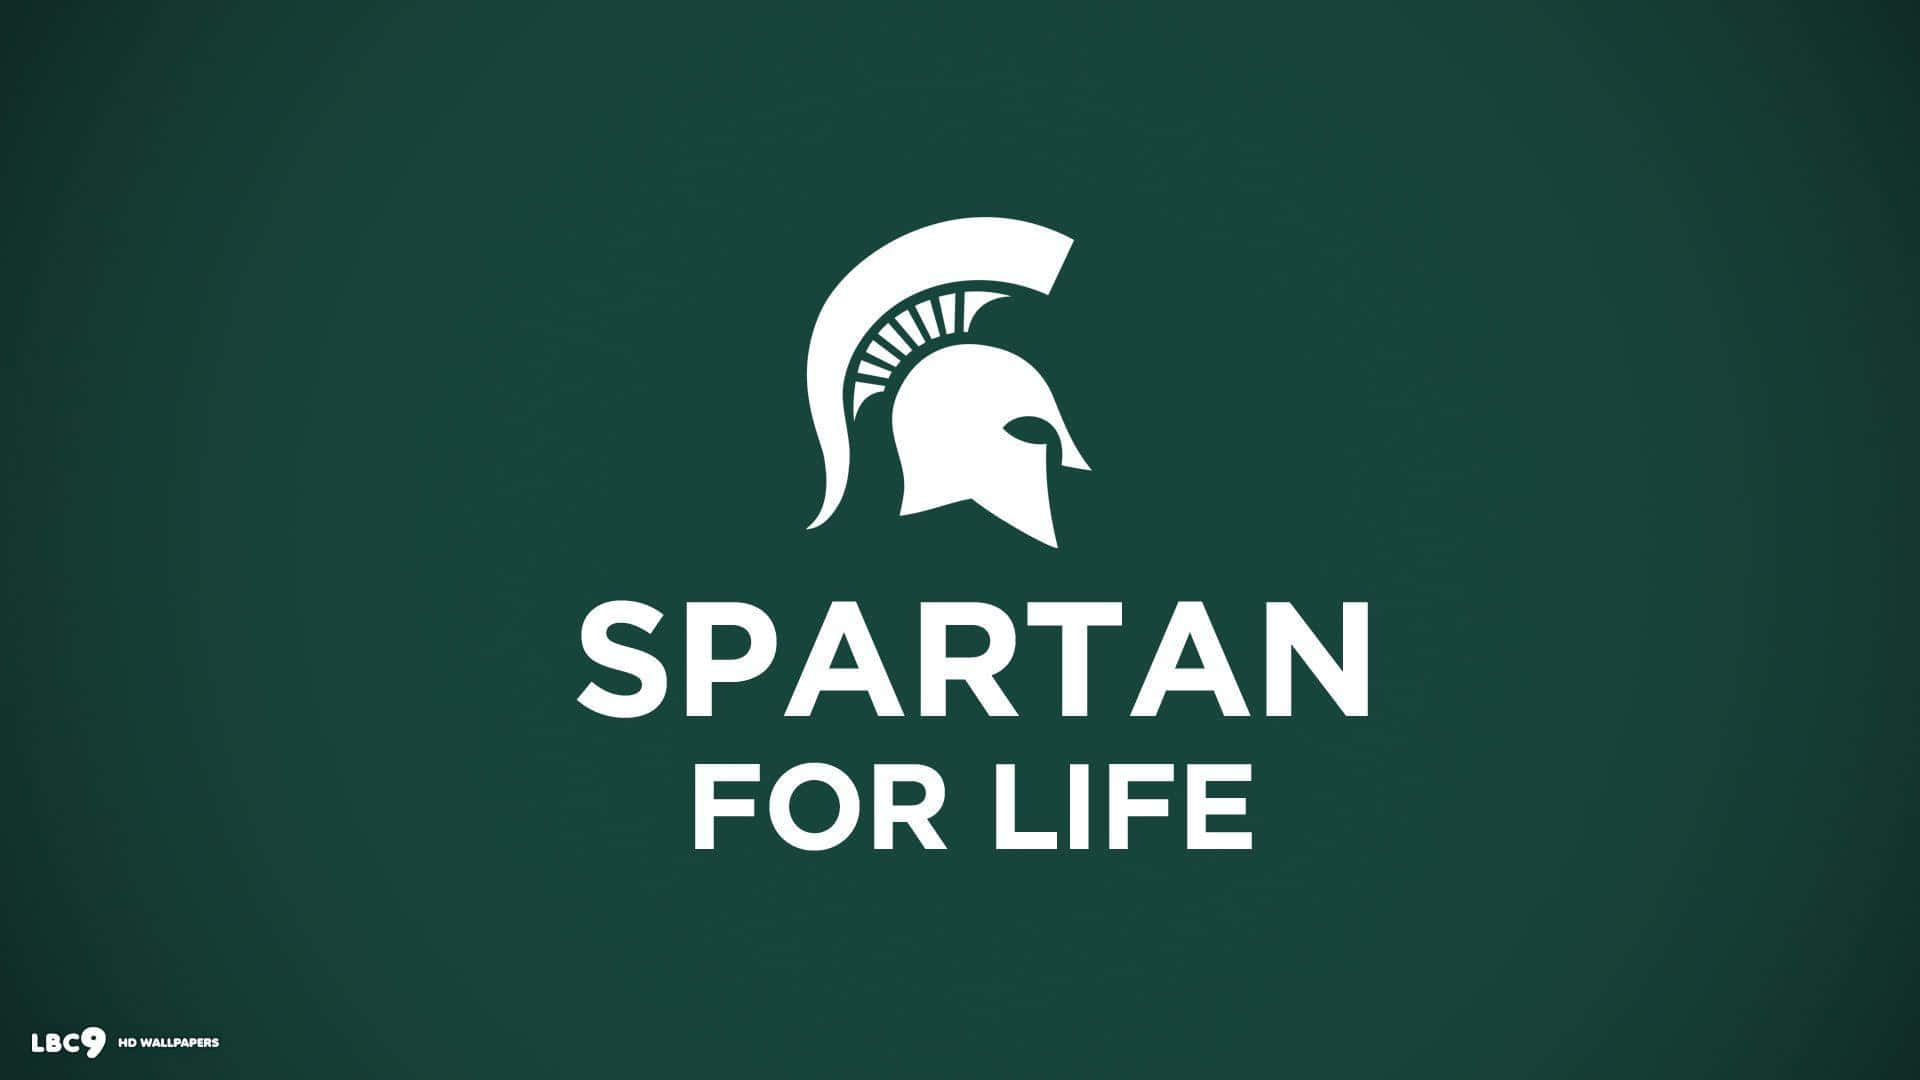 Spartan For Life Logo On A Green Background